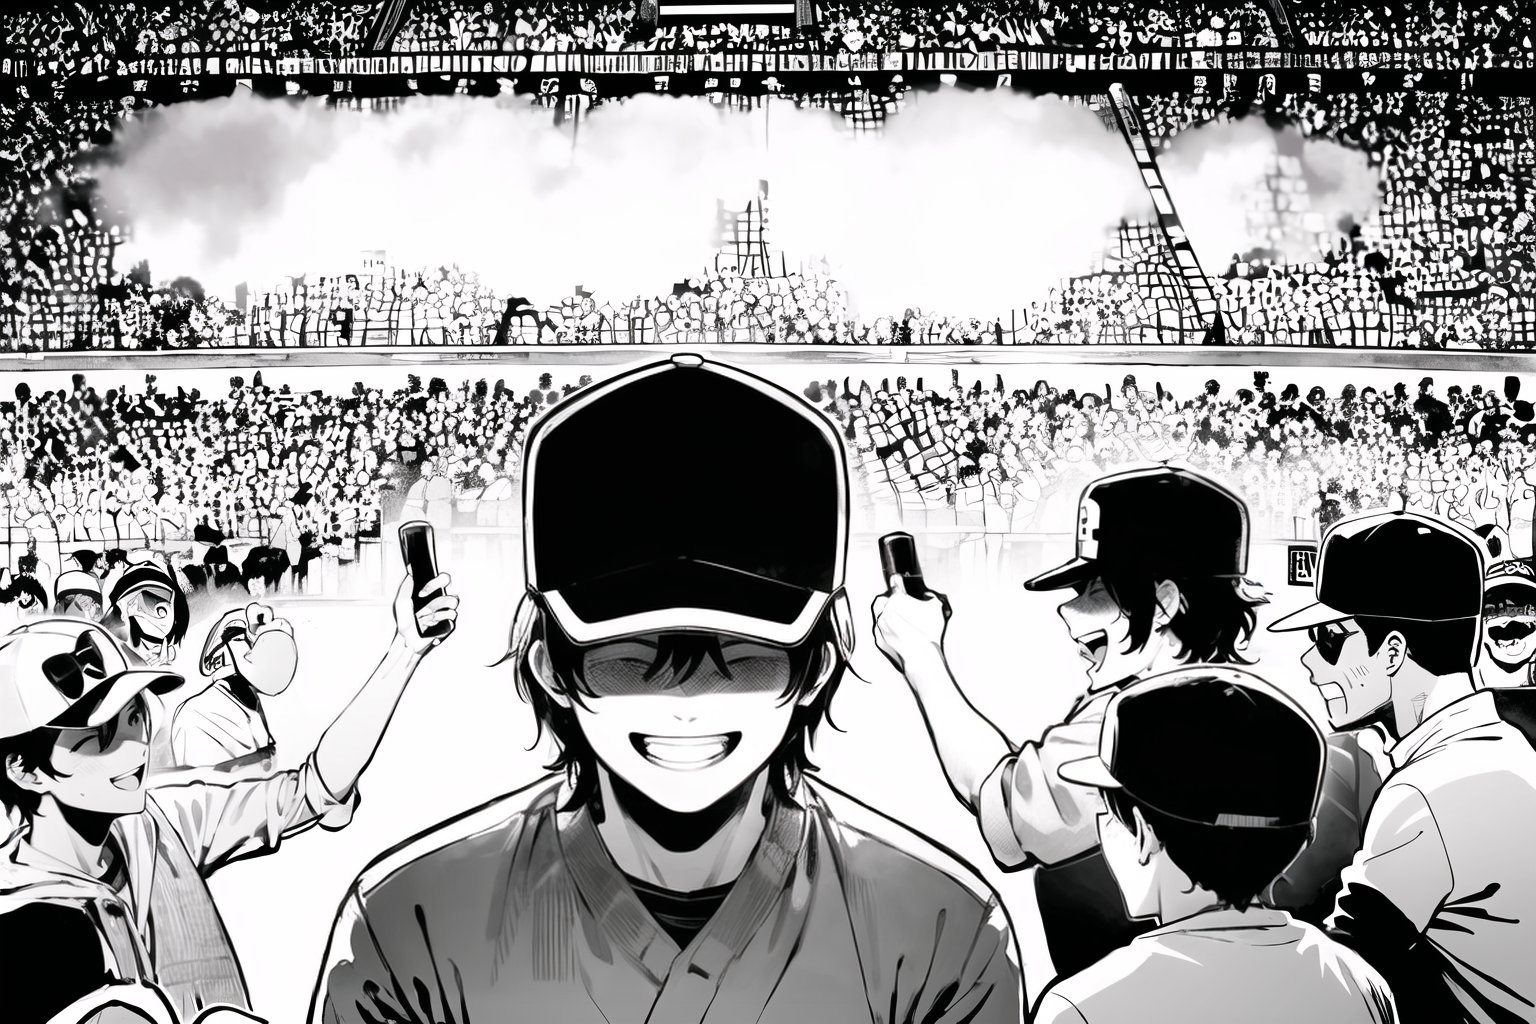 A triumphant baseball player stands proudly on the baseball field, hoisting the coveted championship trophy aloft as teammates rush to congratulate him. The bright sunlight casts a warm glow on their joyful faces and baseball caps, while the uniformed crowd cheers in unison, celebrating their team's momentous victory, manga style {prompt}. vibrant, high-energy, detailed, iconic, Japanese comic style, emphasizing the simplicity and serenity of a black and white Japanese manga style, clean line work, striking visuals, bold outlines, (manga influence:1.3), boichi manga style
